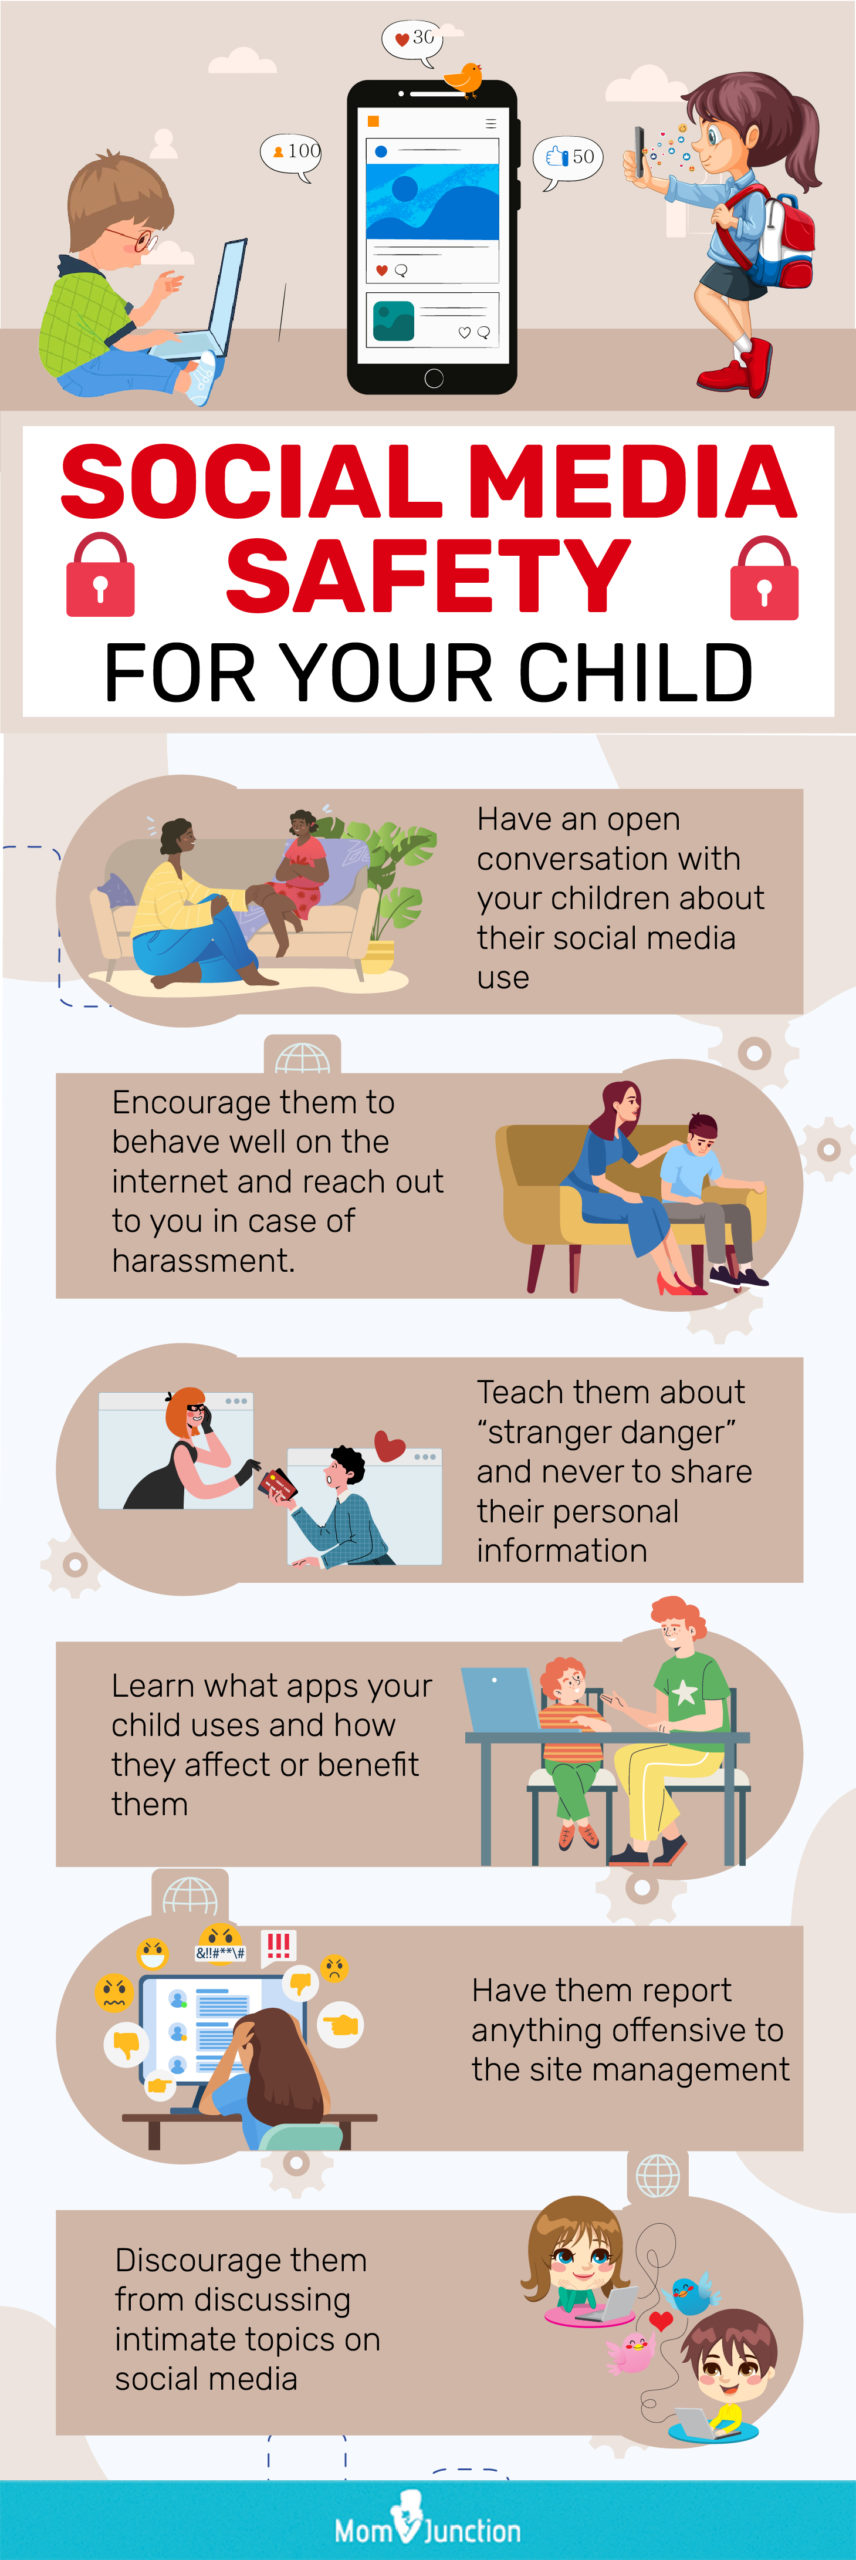 social media safety for your child [infographic]